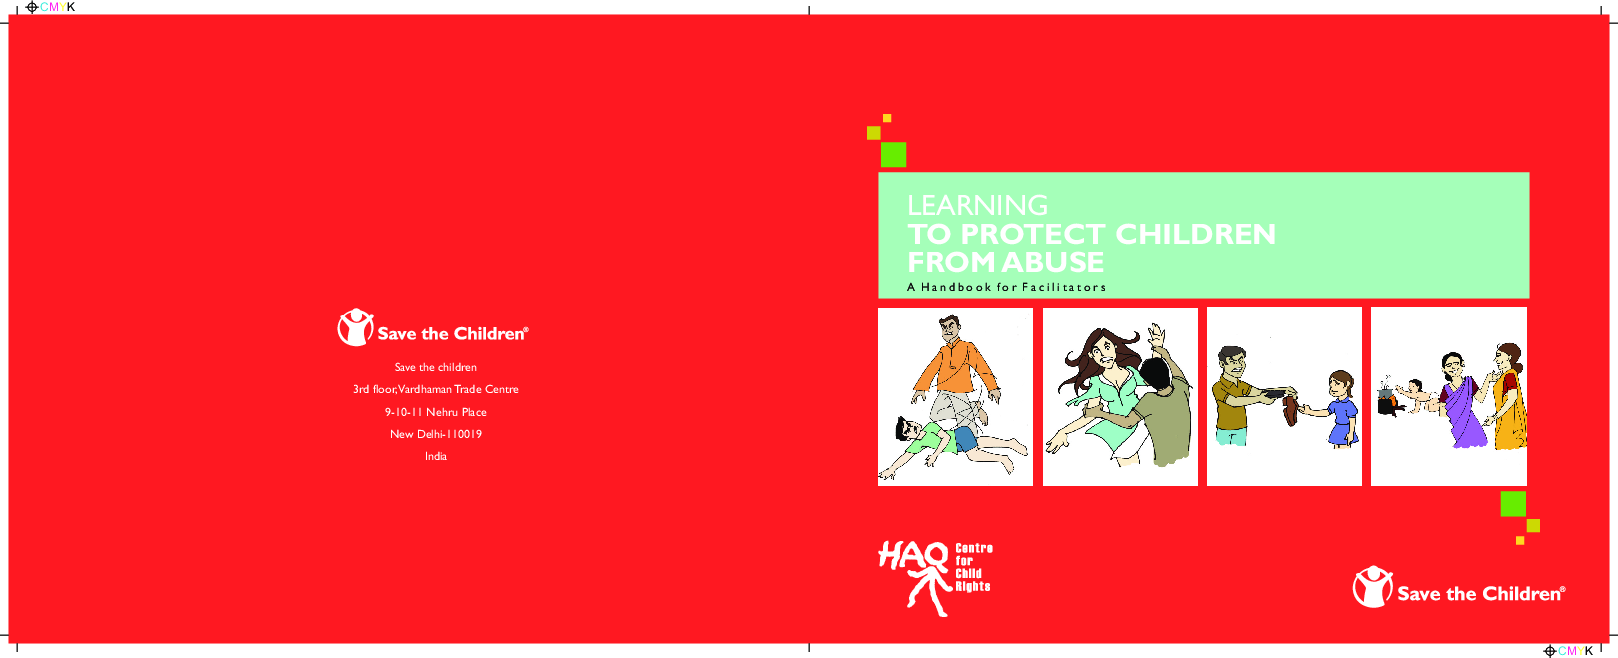 learning_to_protection_children_from_abuse_a_handbook_for_facilitators.pdf_0.png